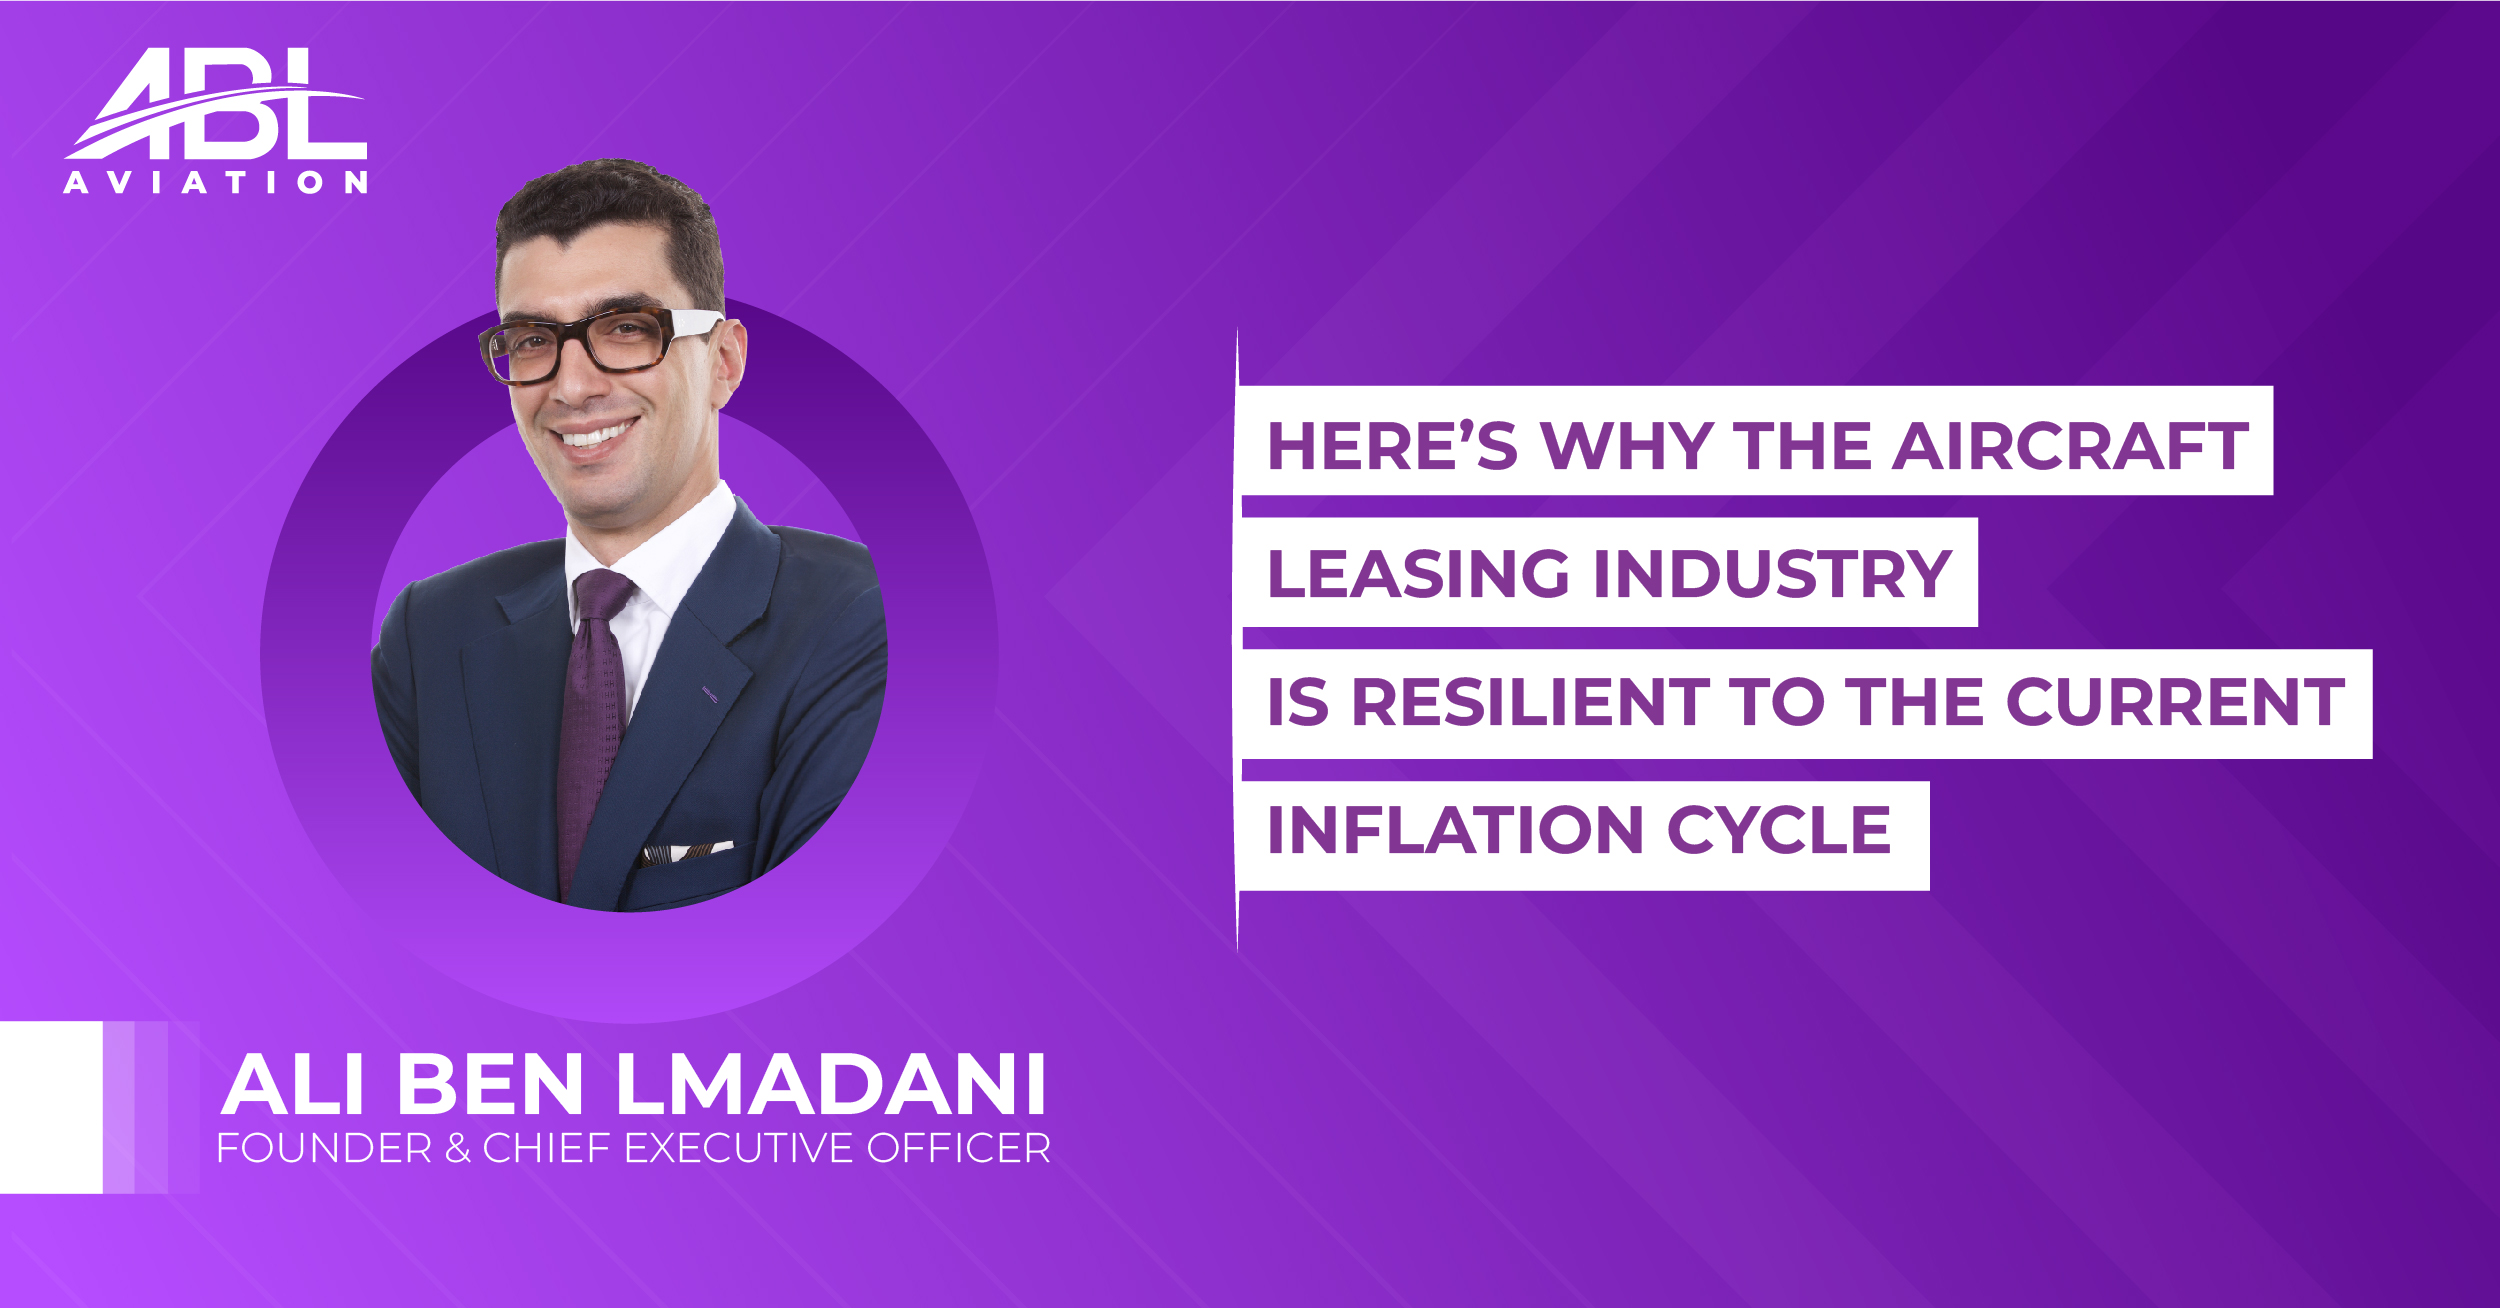 Here’s Why the Aircraft Leasing Industry Is Resilient to the Current Inflation Cycle